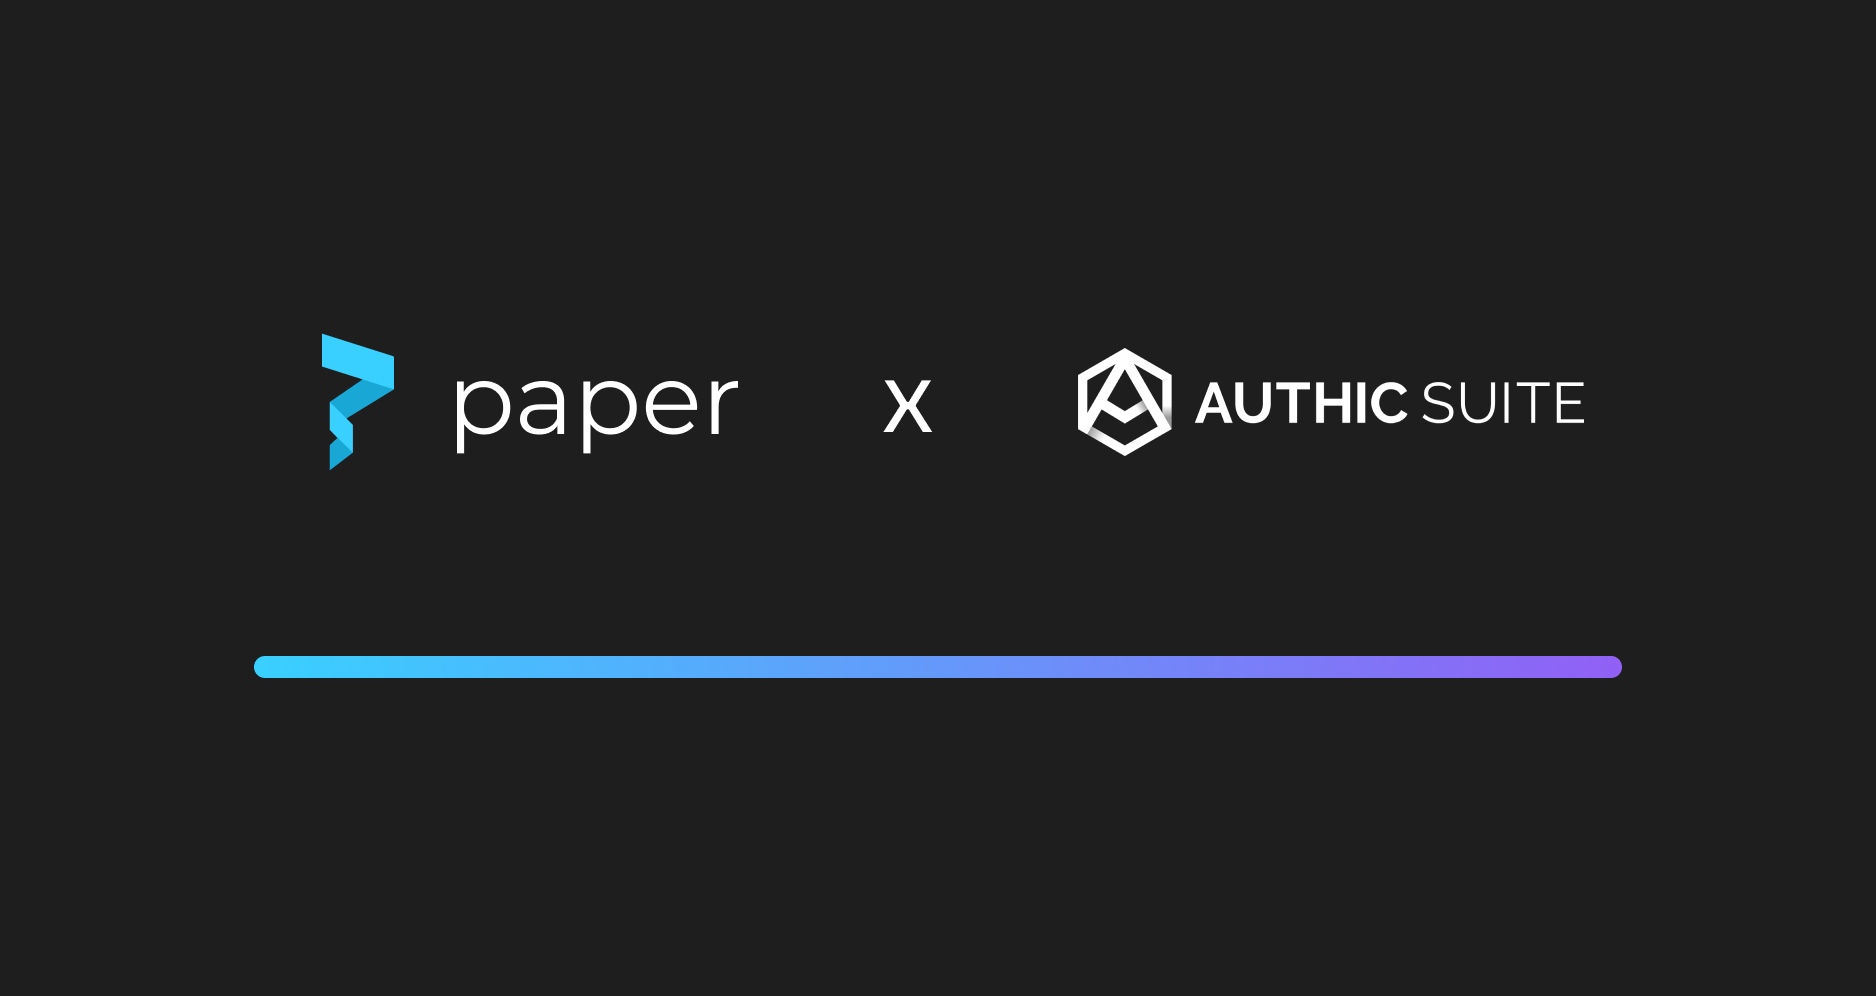 Artists can now create a no-code NFT marketplace with Authic Suite & Paper